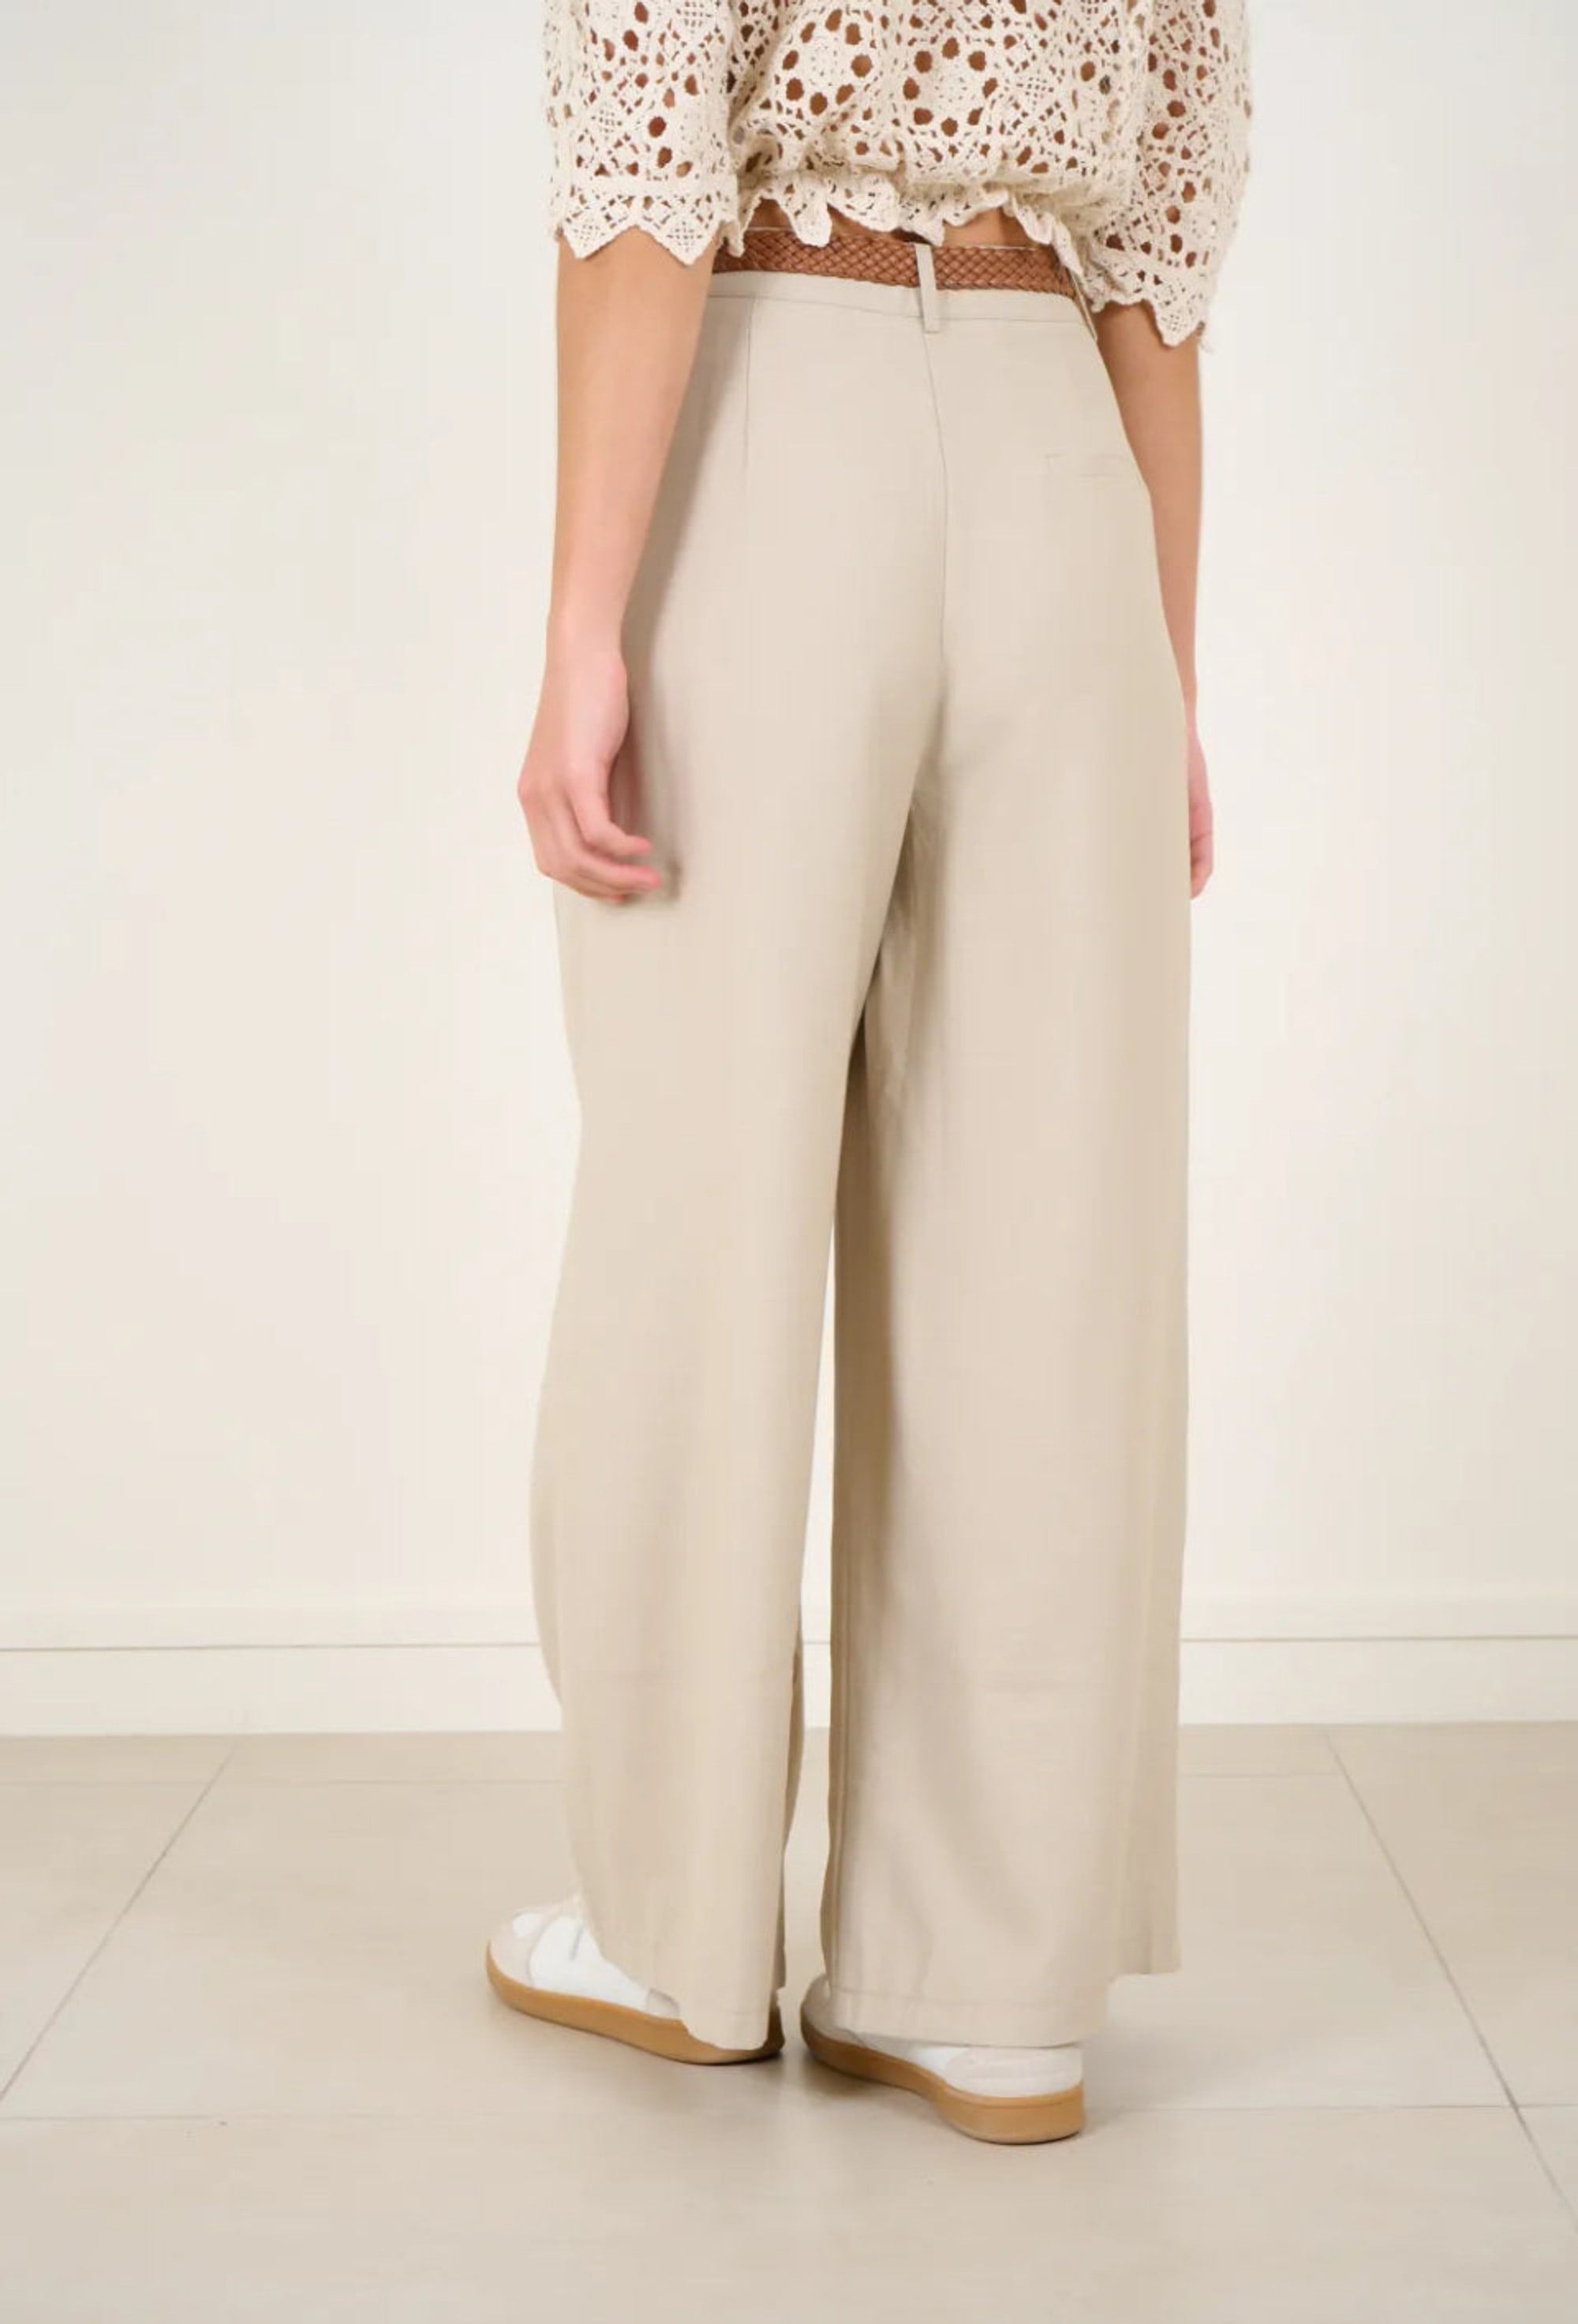 Clever Alice Normandy Pant in Beige 